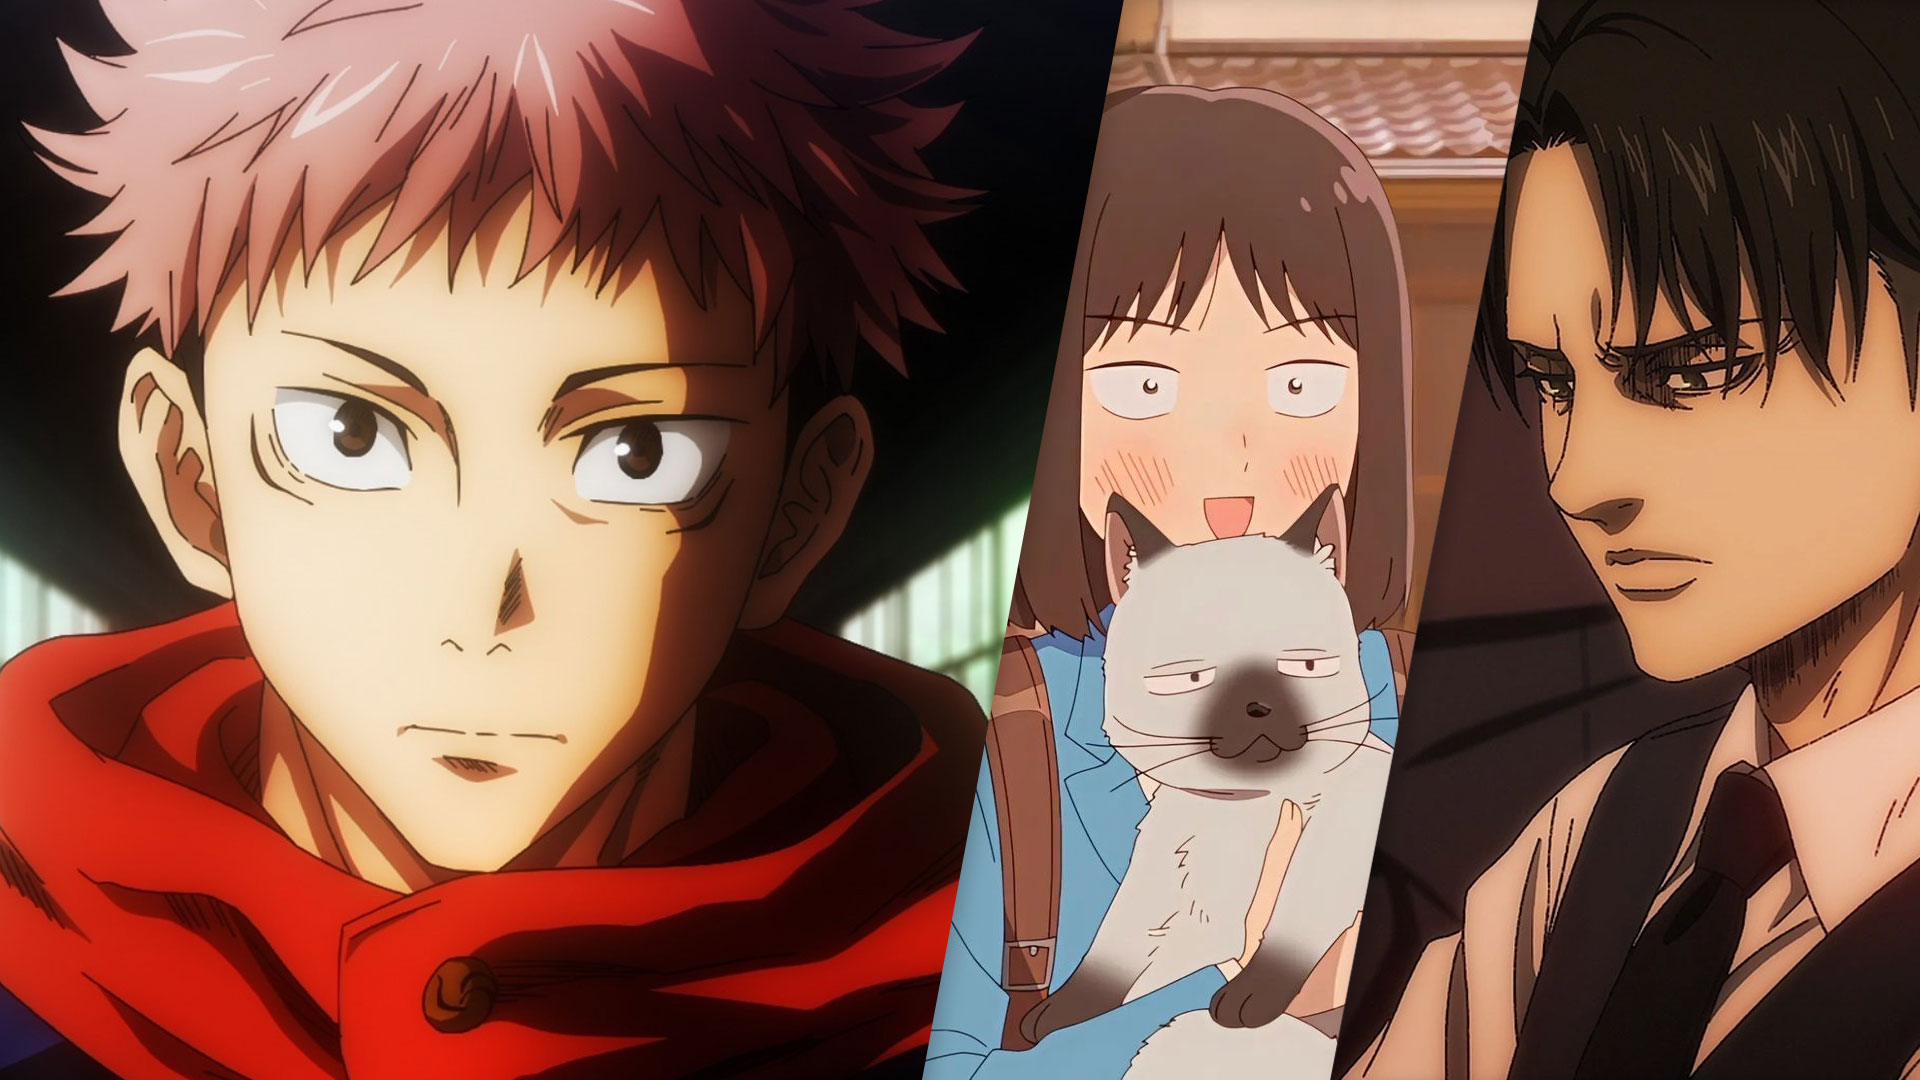 10 Anime Characters You’d Love to Share a Room With 